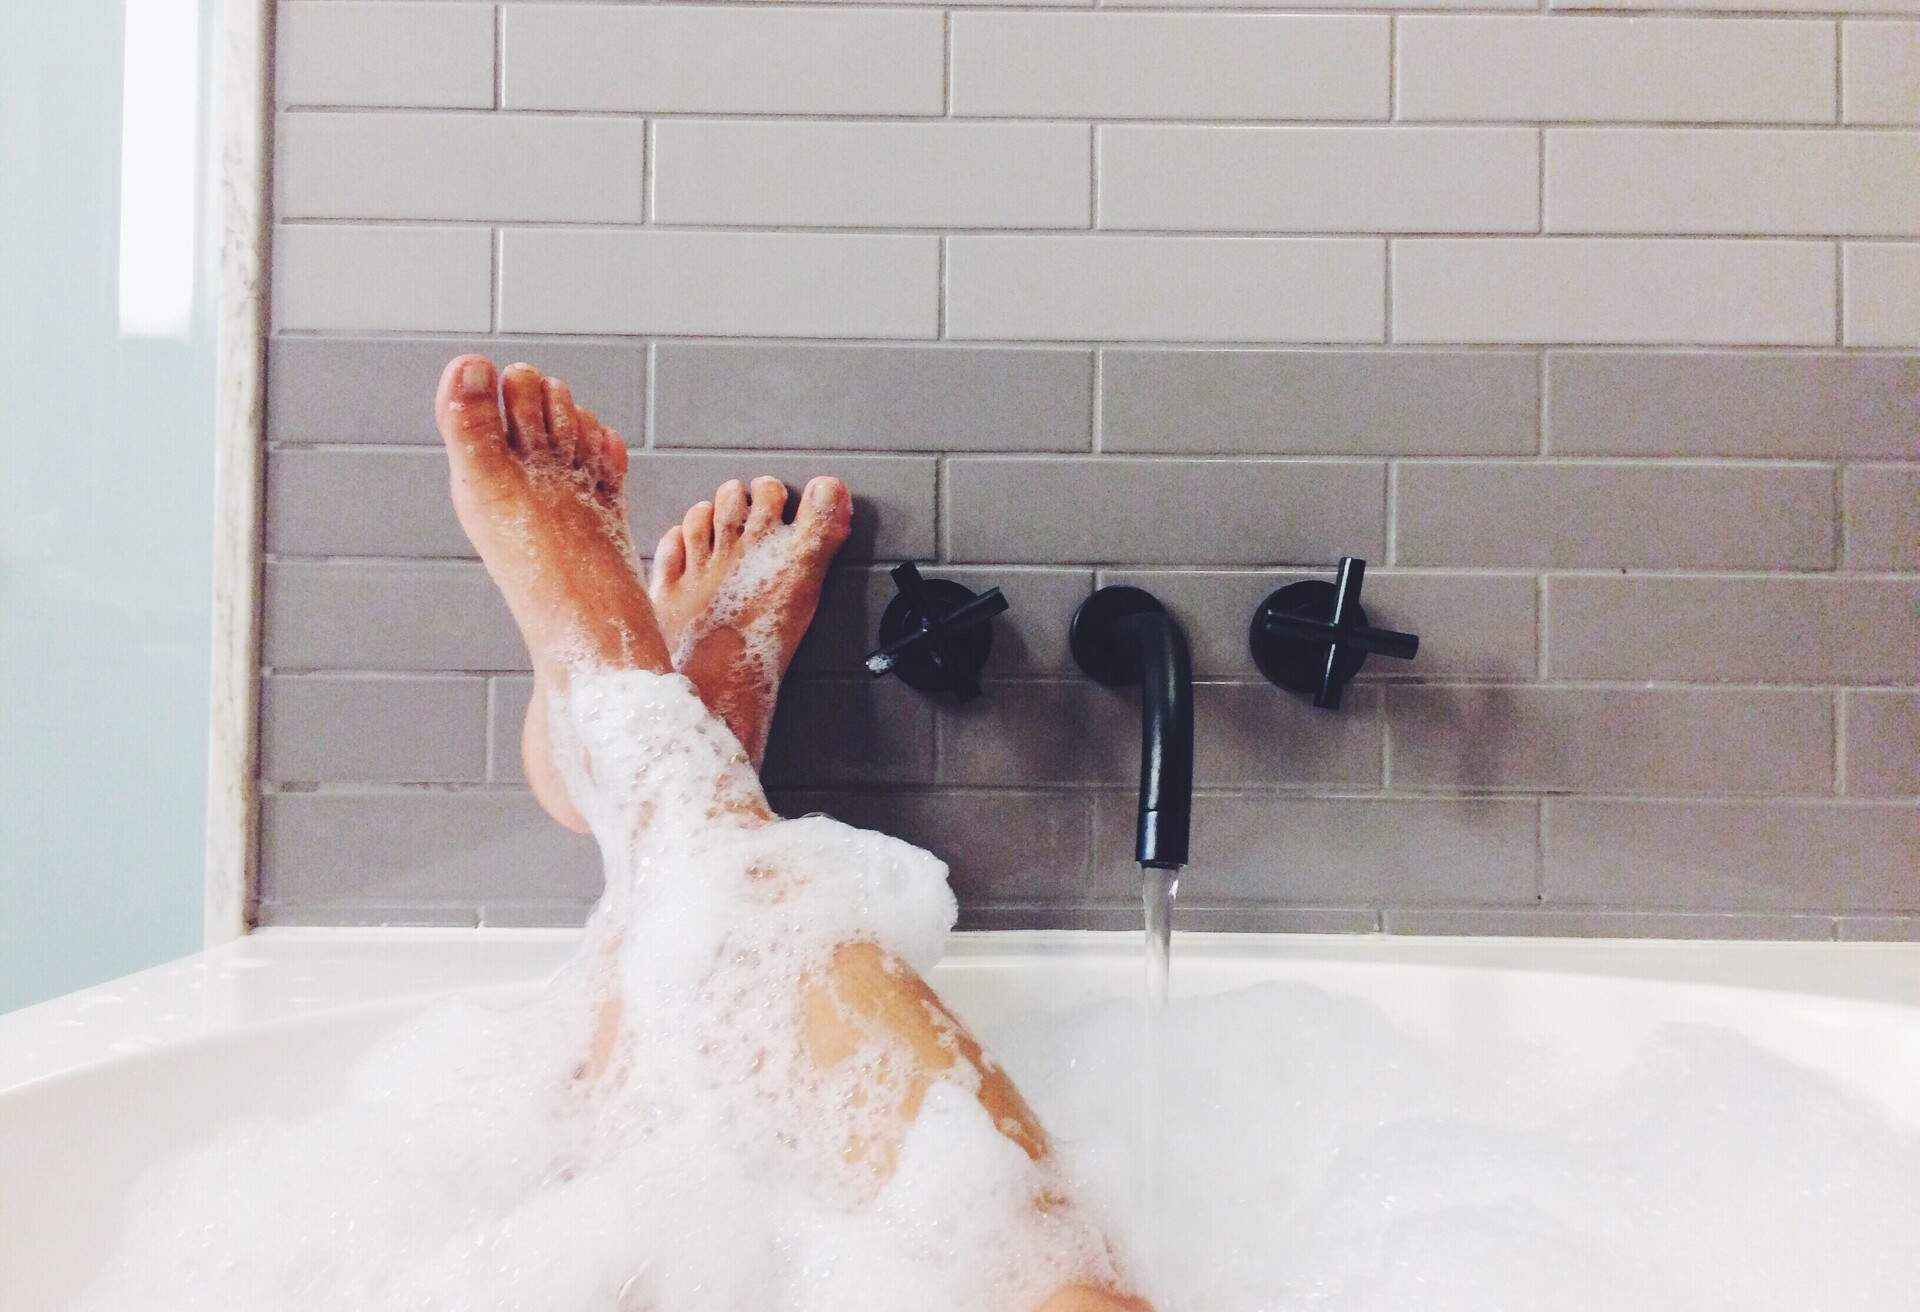 A person's legs, covered in soapy suds, are raised and resting on the edge of a bathtub.